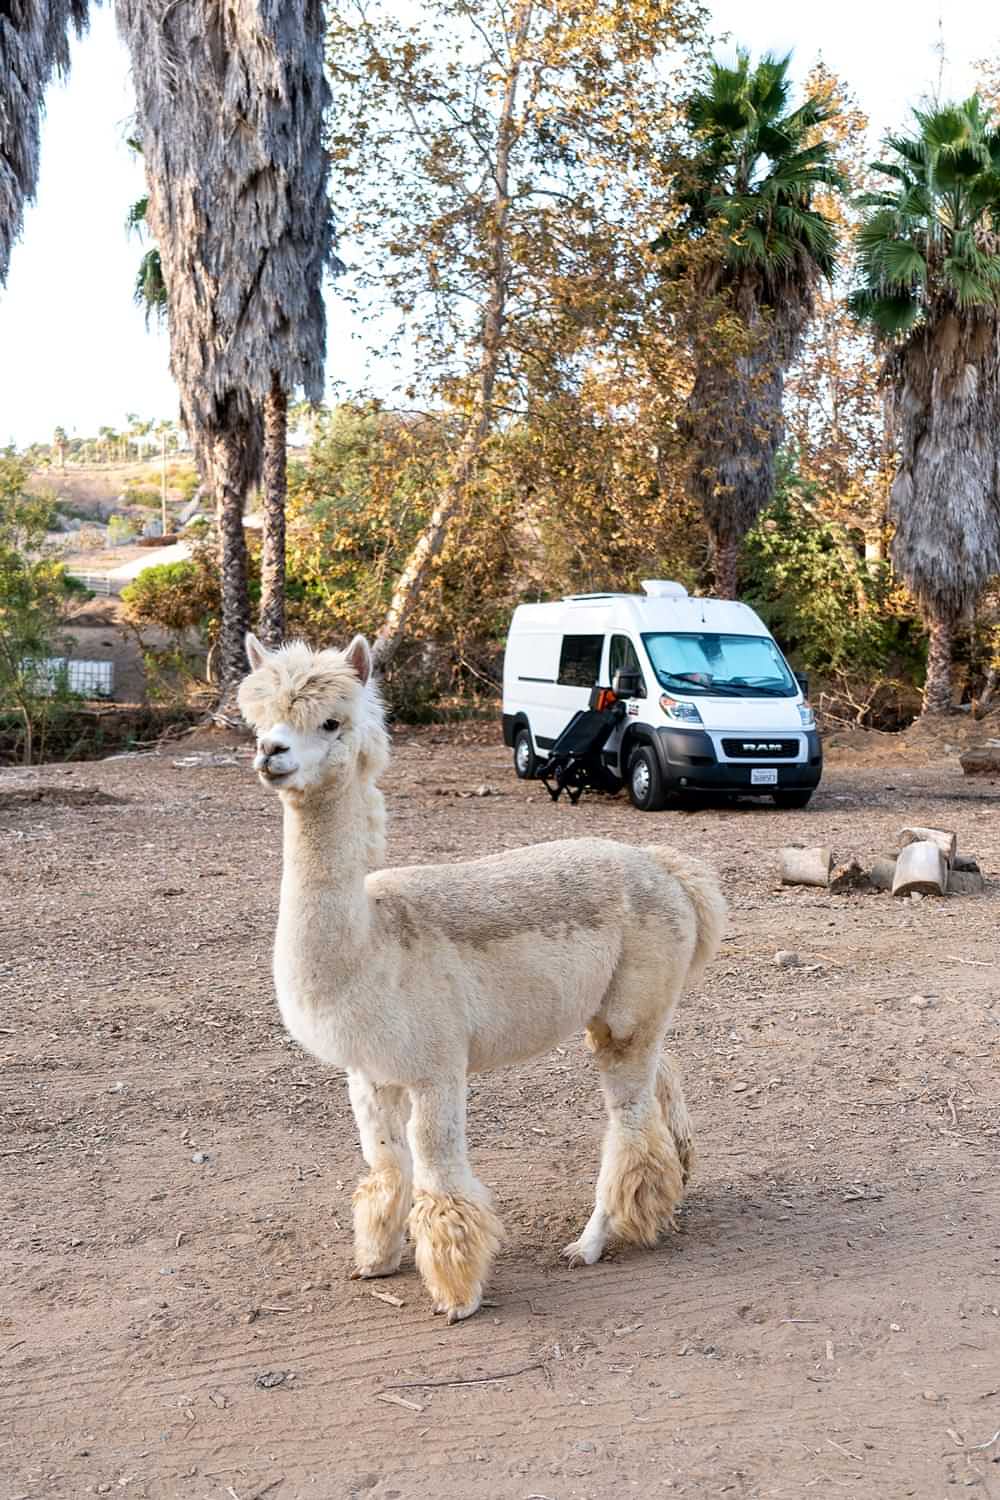 close view of a white Alpaca, in the background sits a parked camper van surrounded by trees